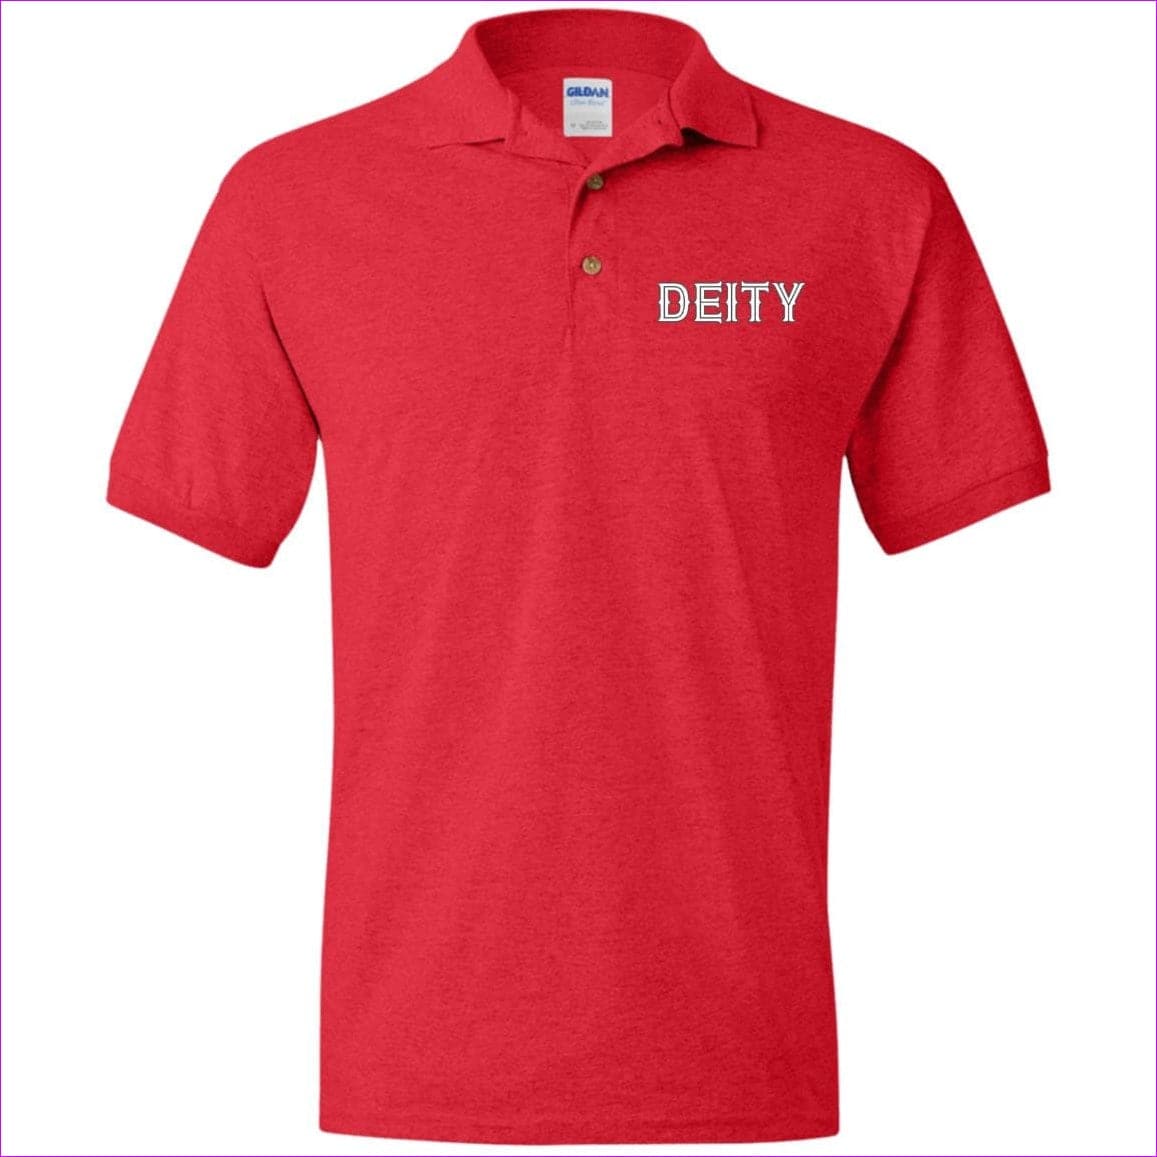 Red Deity Men's Jersey Polo Shirt - Men's Polo Shirts at TFC&H Co.